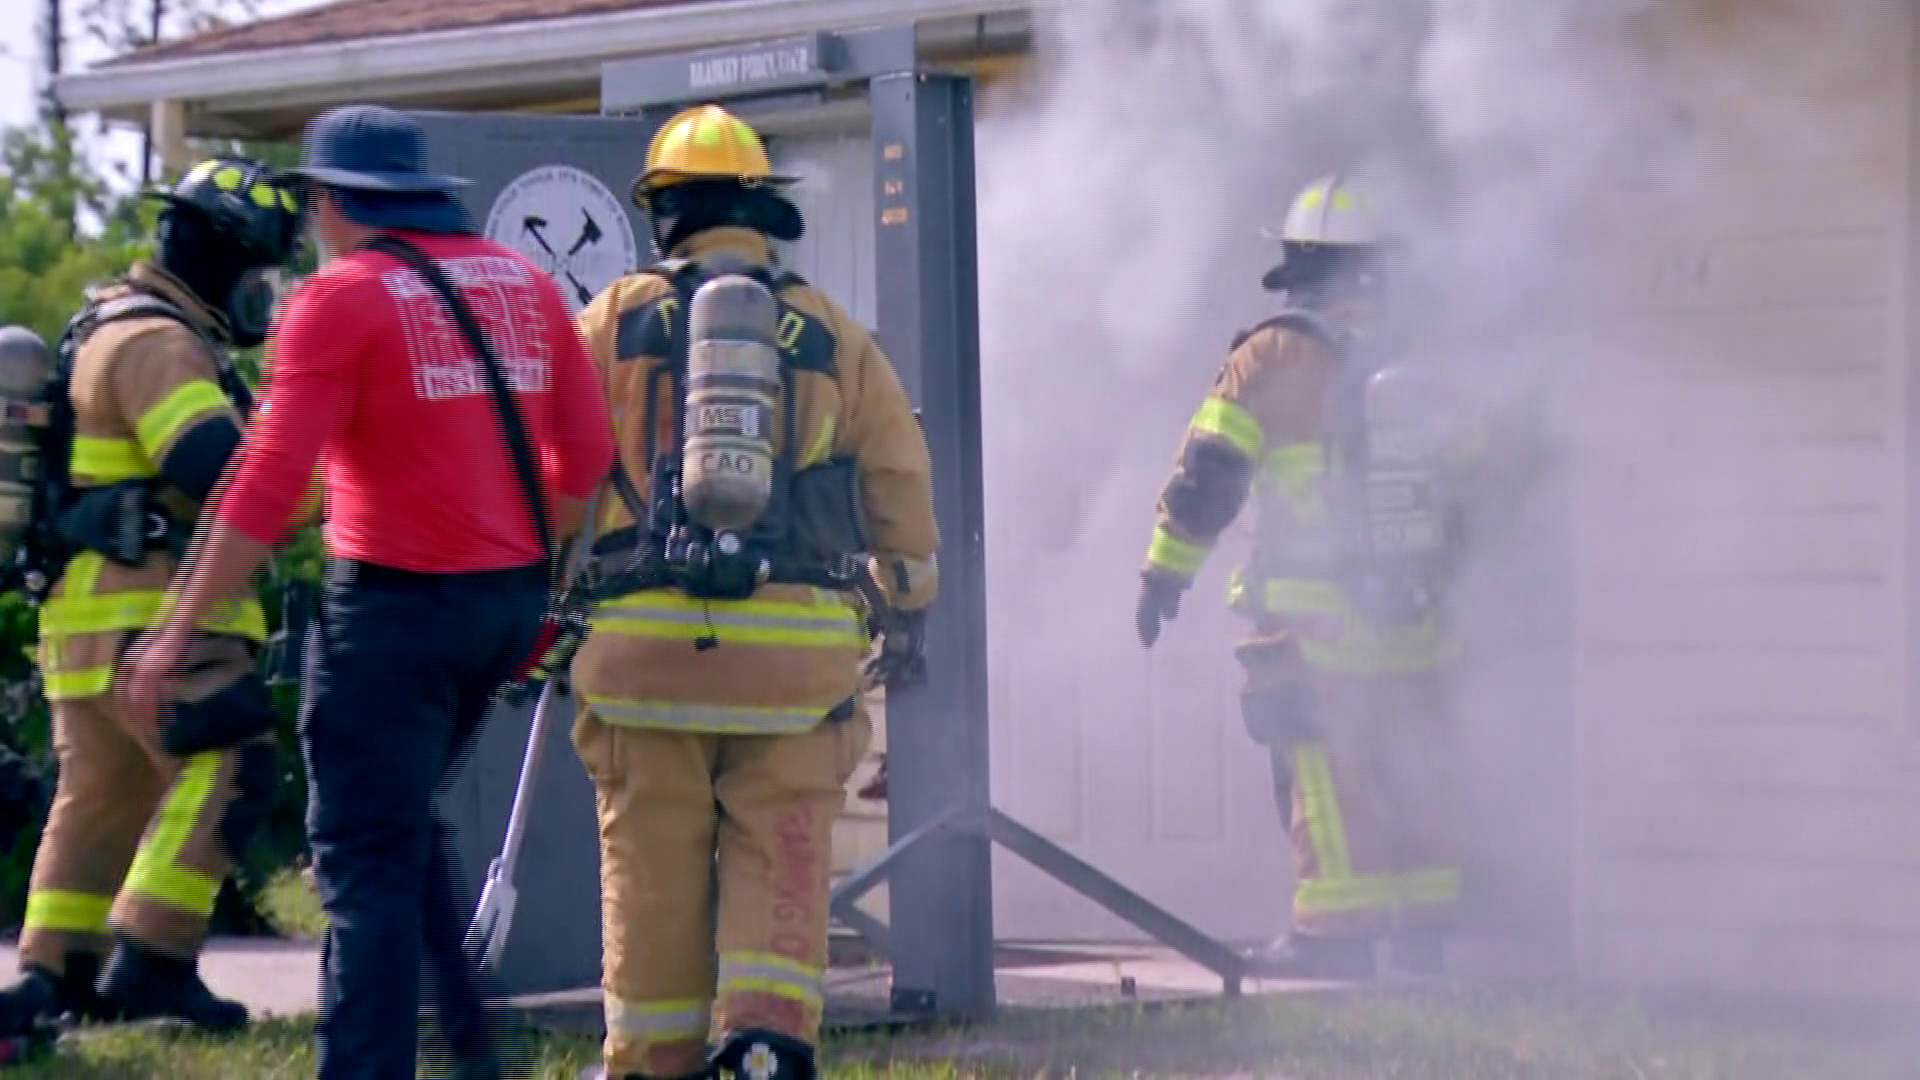 Cape Coral Fire Department trains with use of donated structure